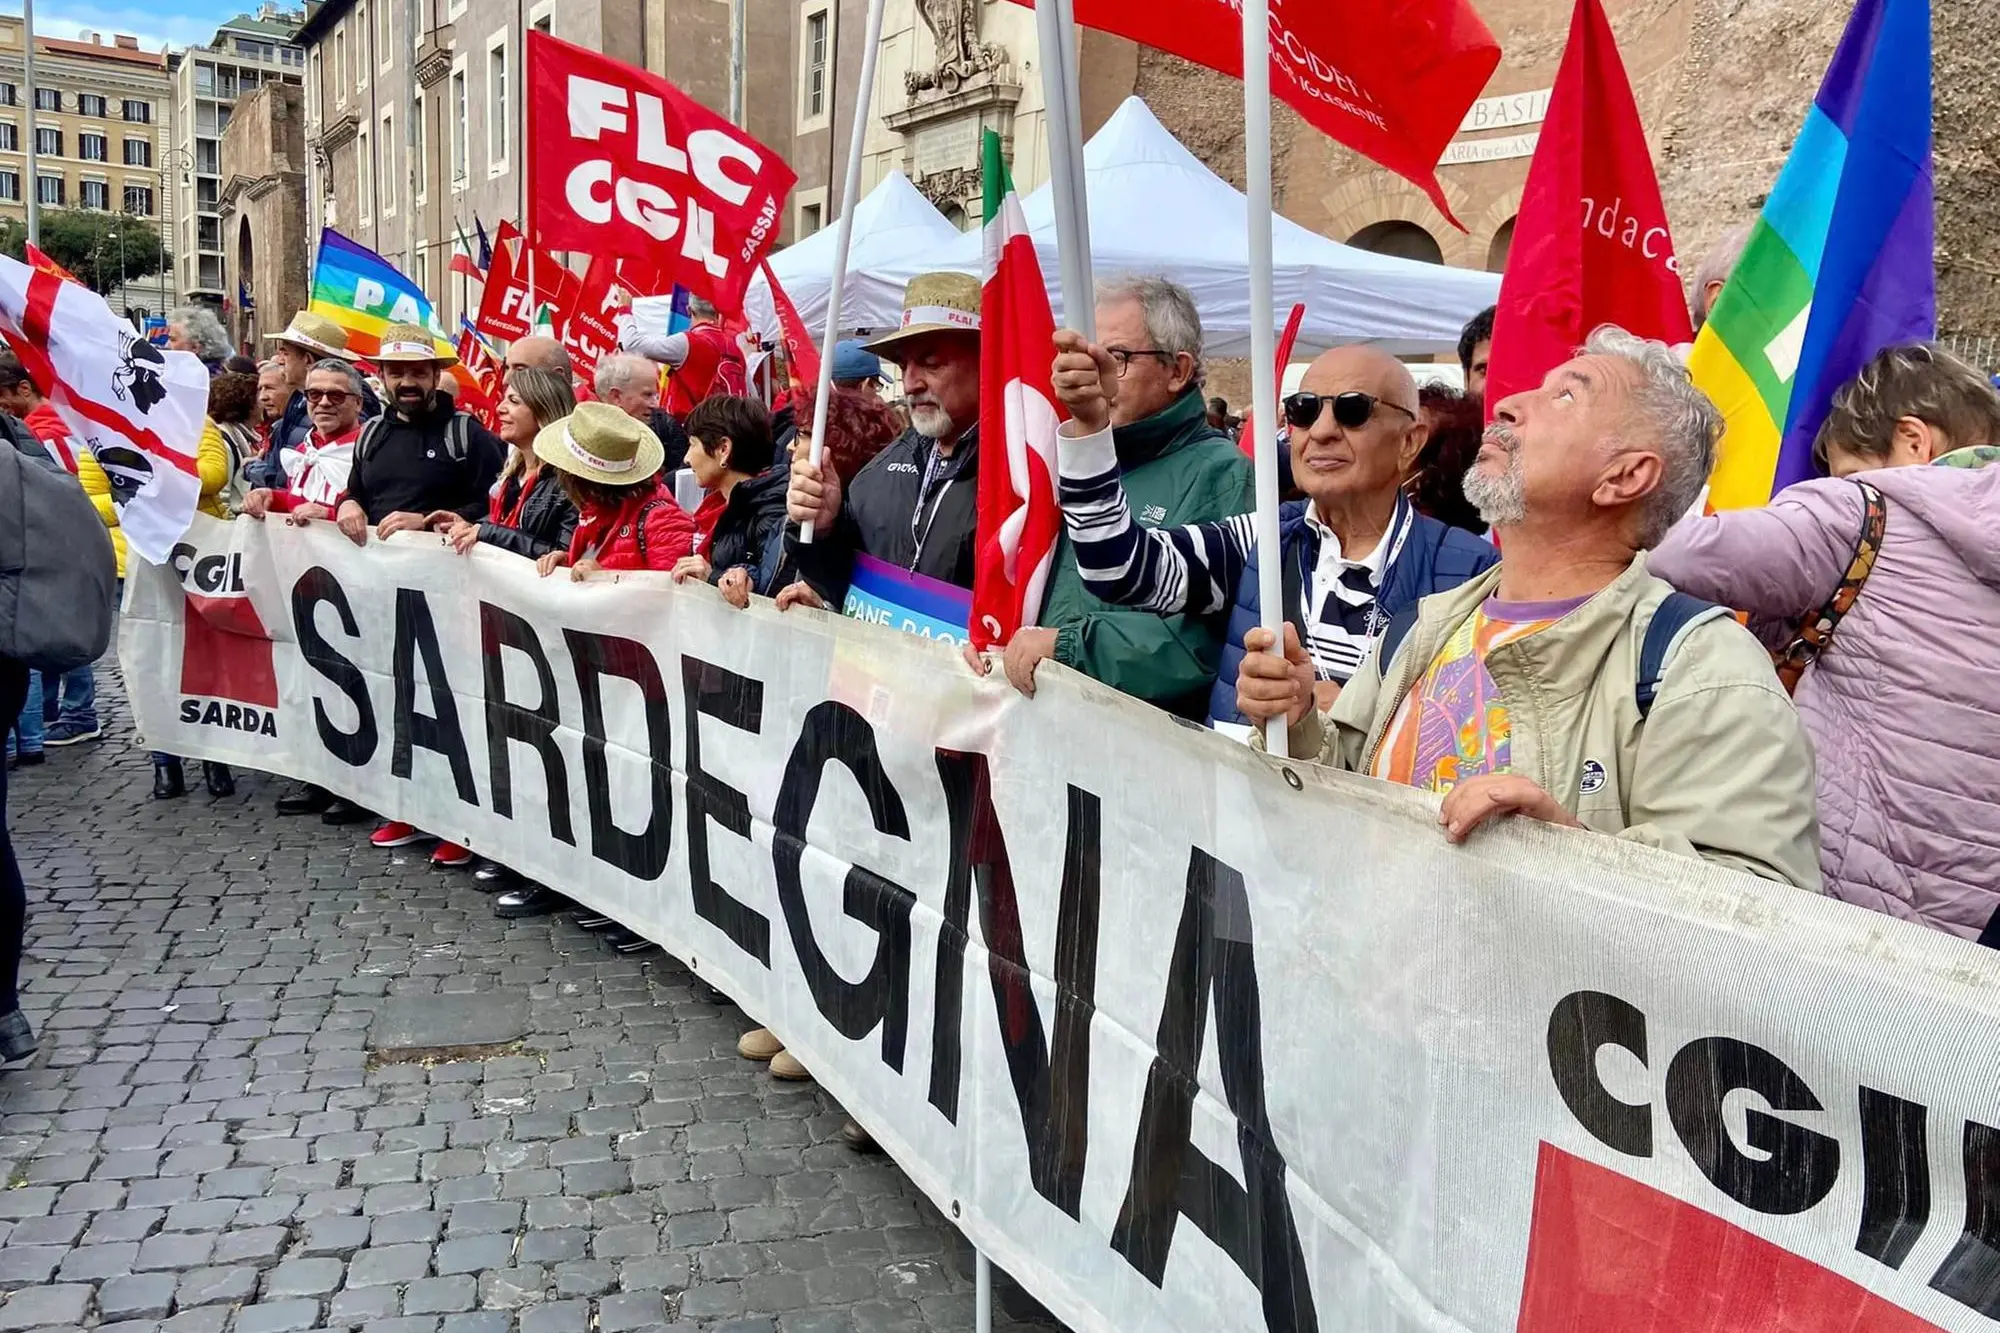 The Sardinian CGIL in the square (from Facebook)